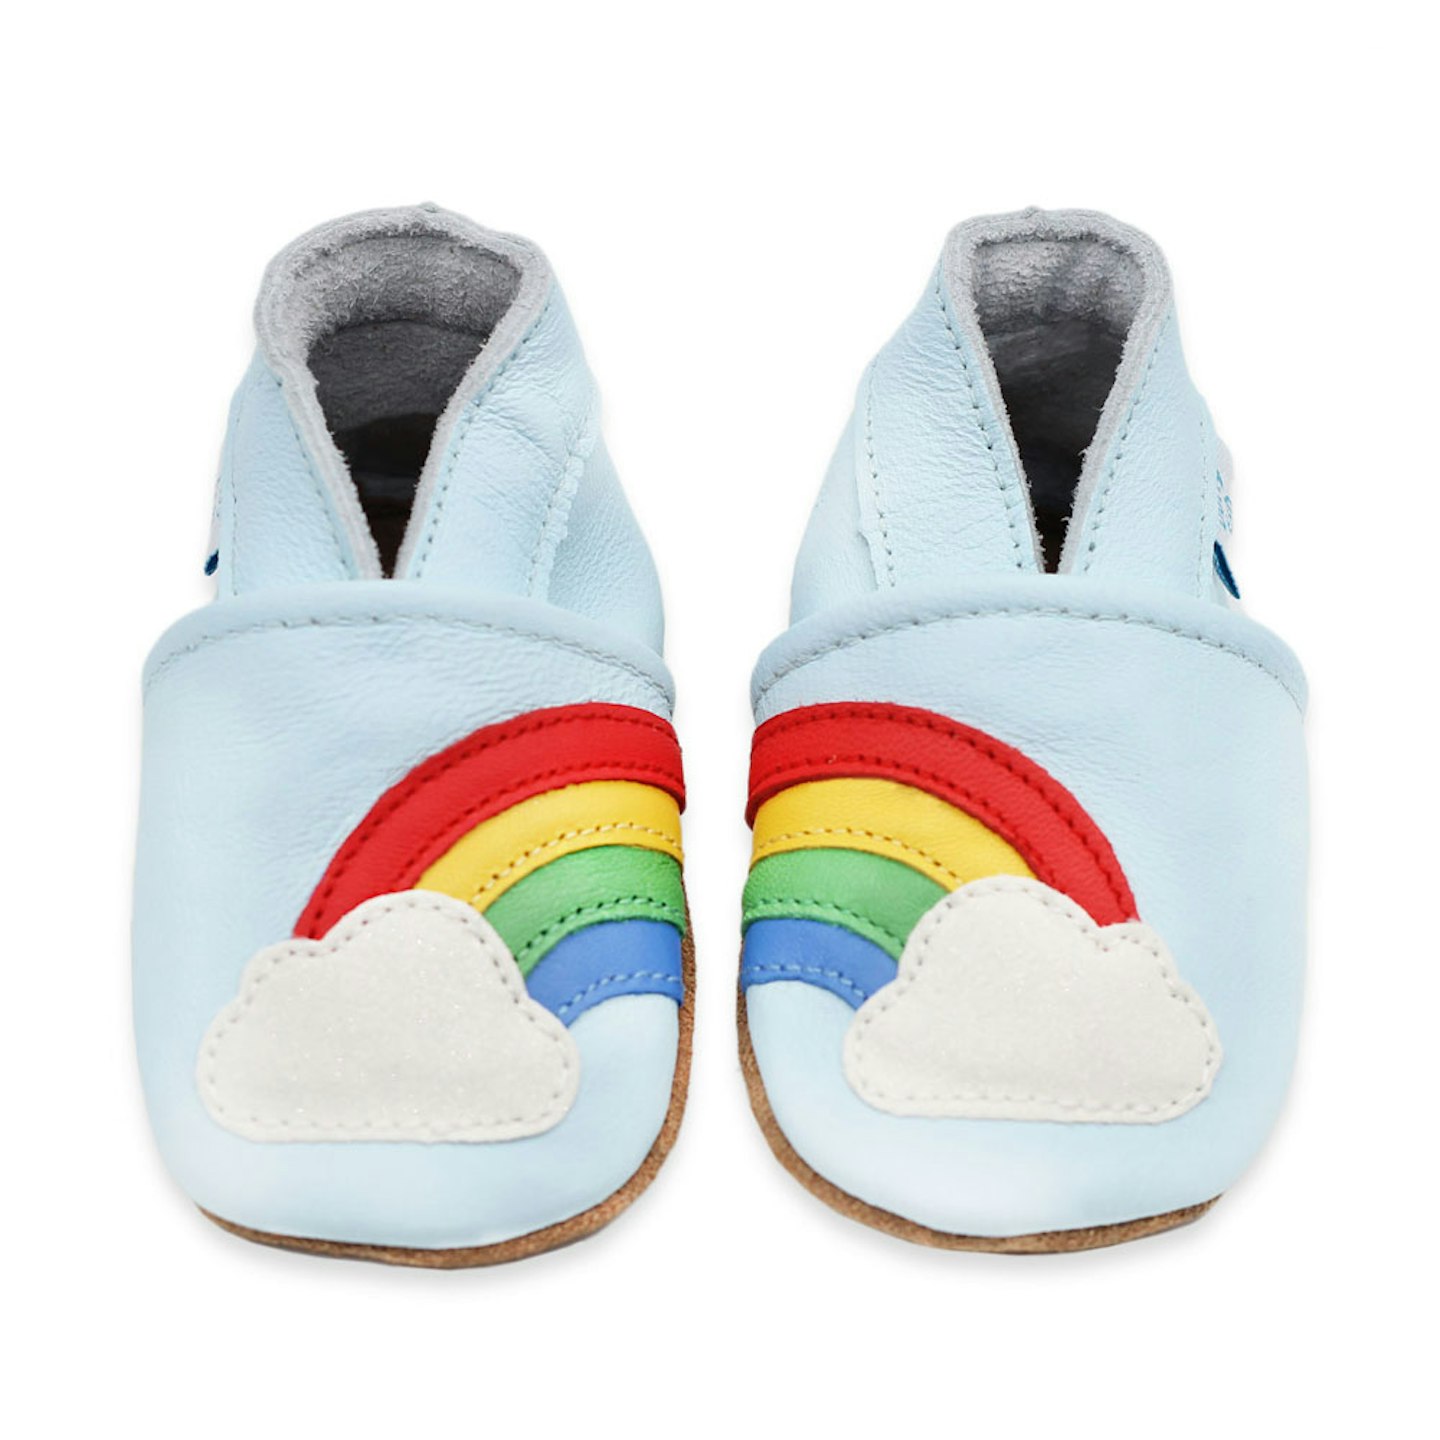 Over the Rainbow baby's first shoes